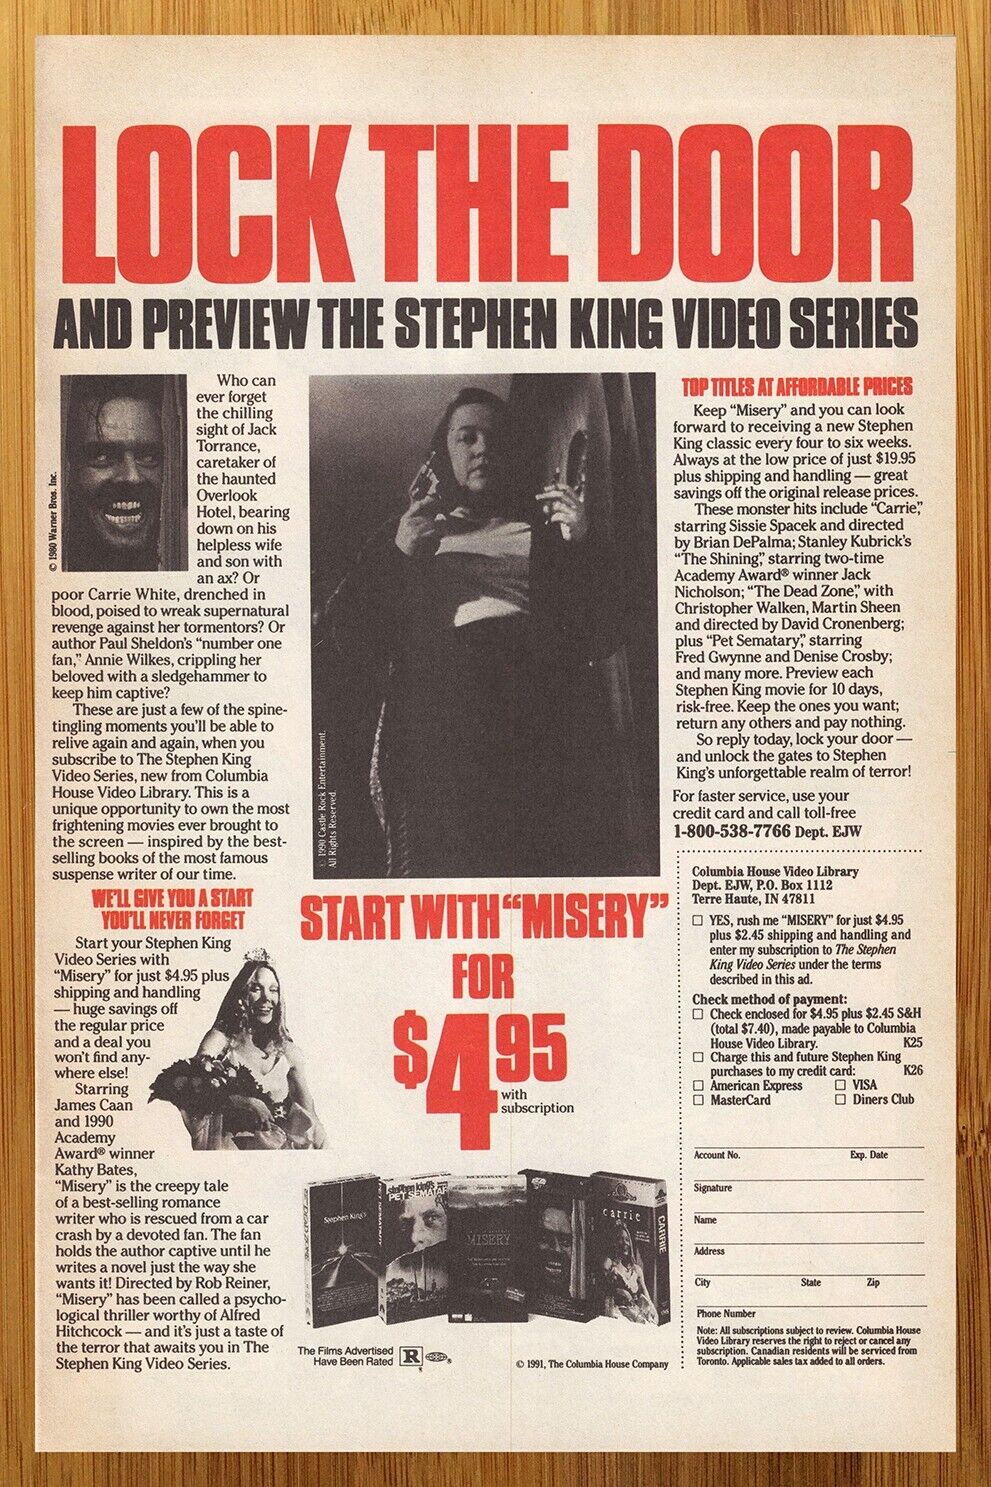 1991 Stephen King VHS Video Series Print Ad/Poster Misery Carrie The Shining Art